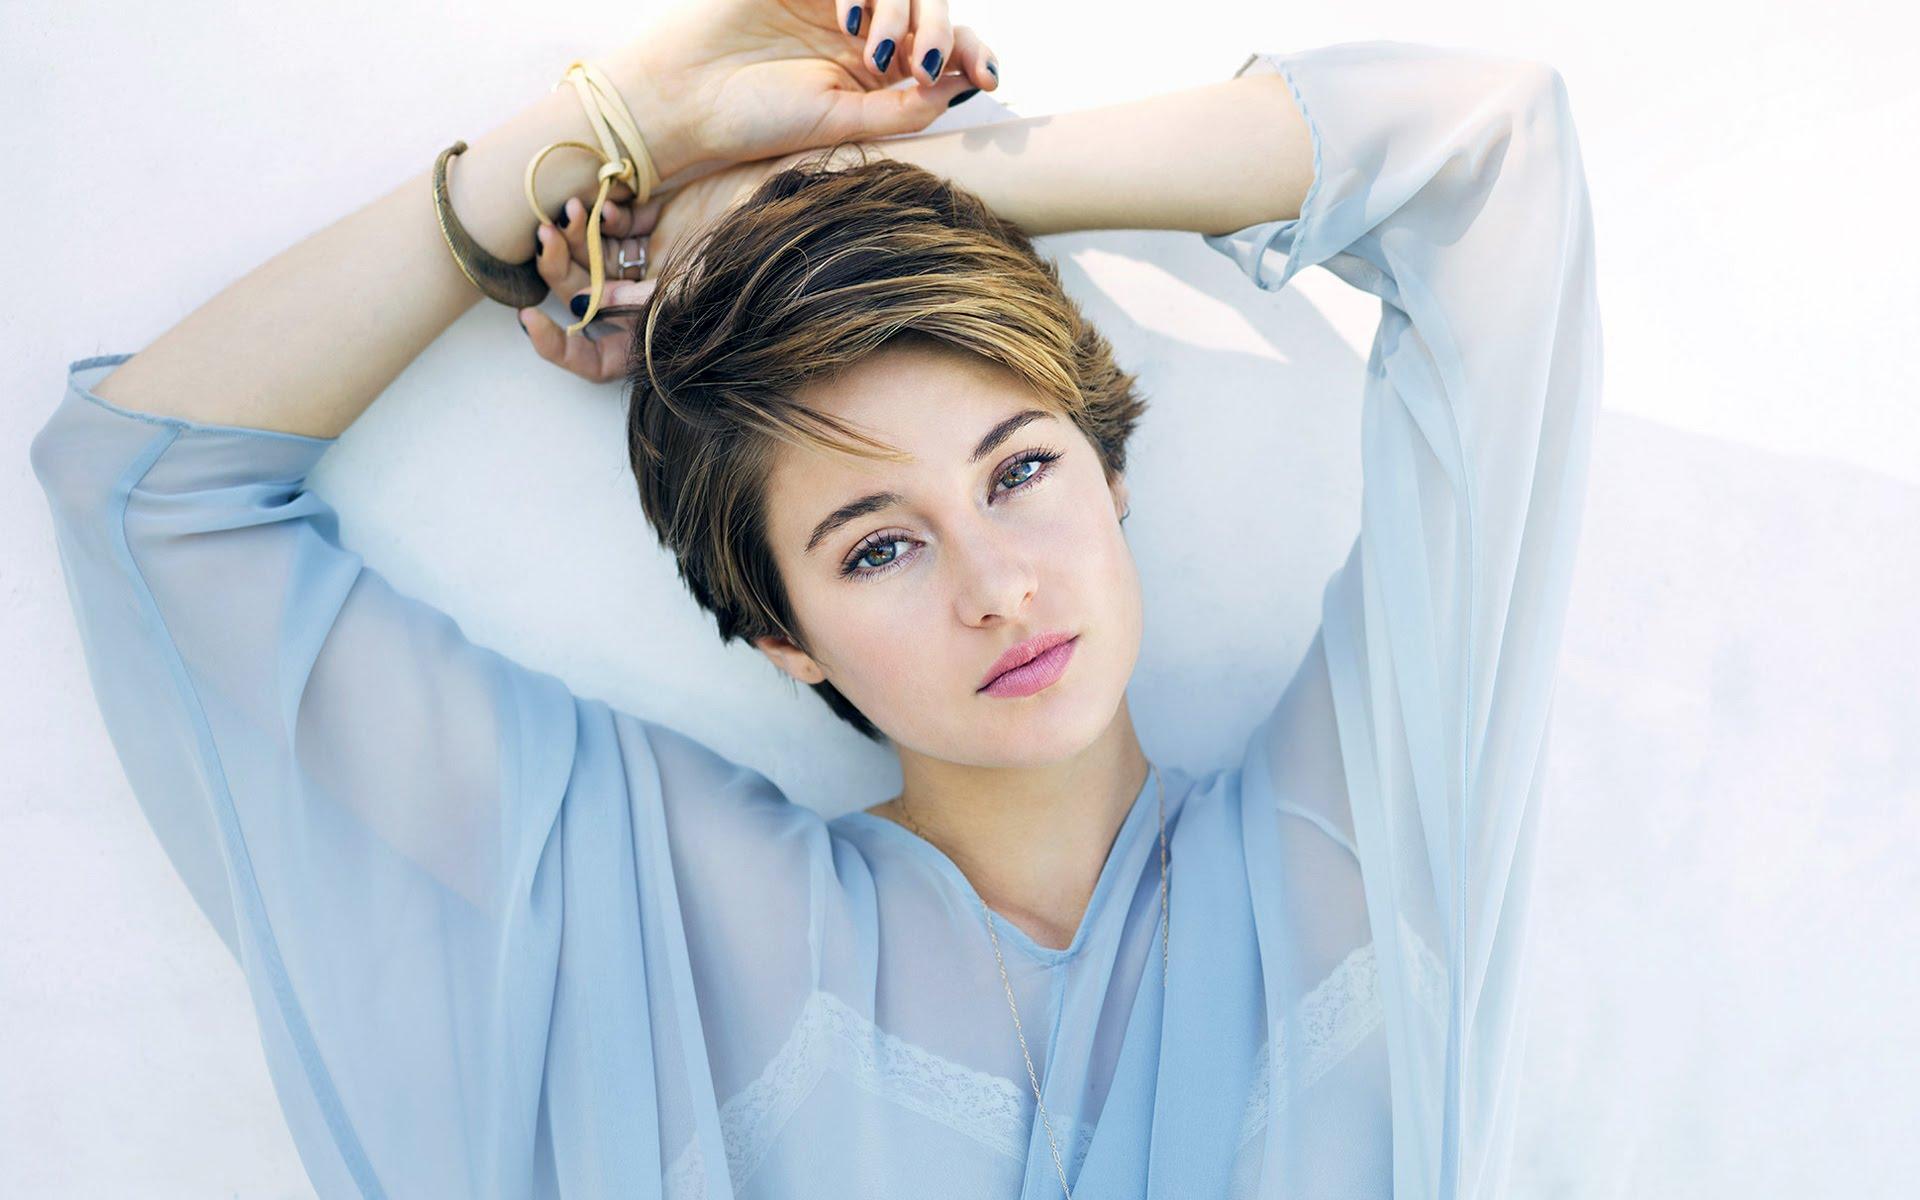 60+ Hot Pictures Of Shailene Woodley – Tris In Divergent Actress | Best Of Comic Books